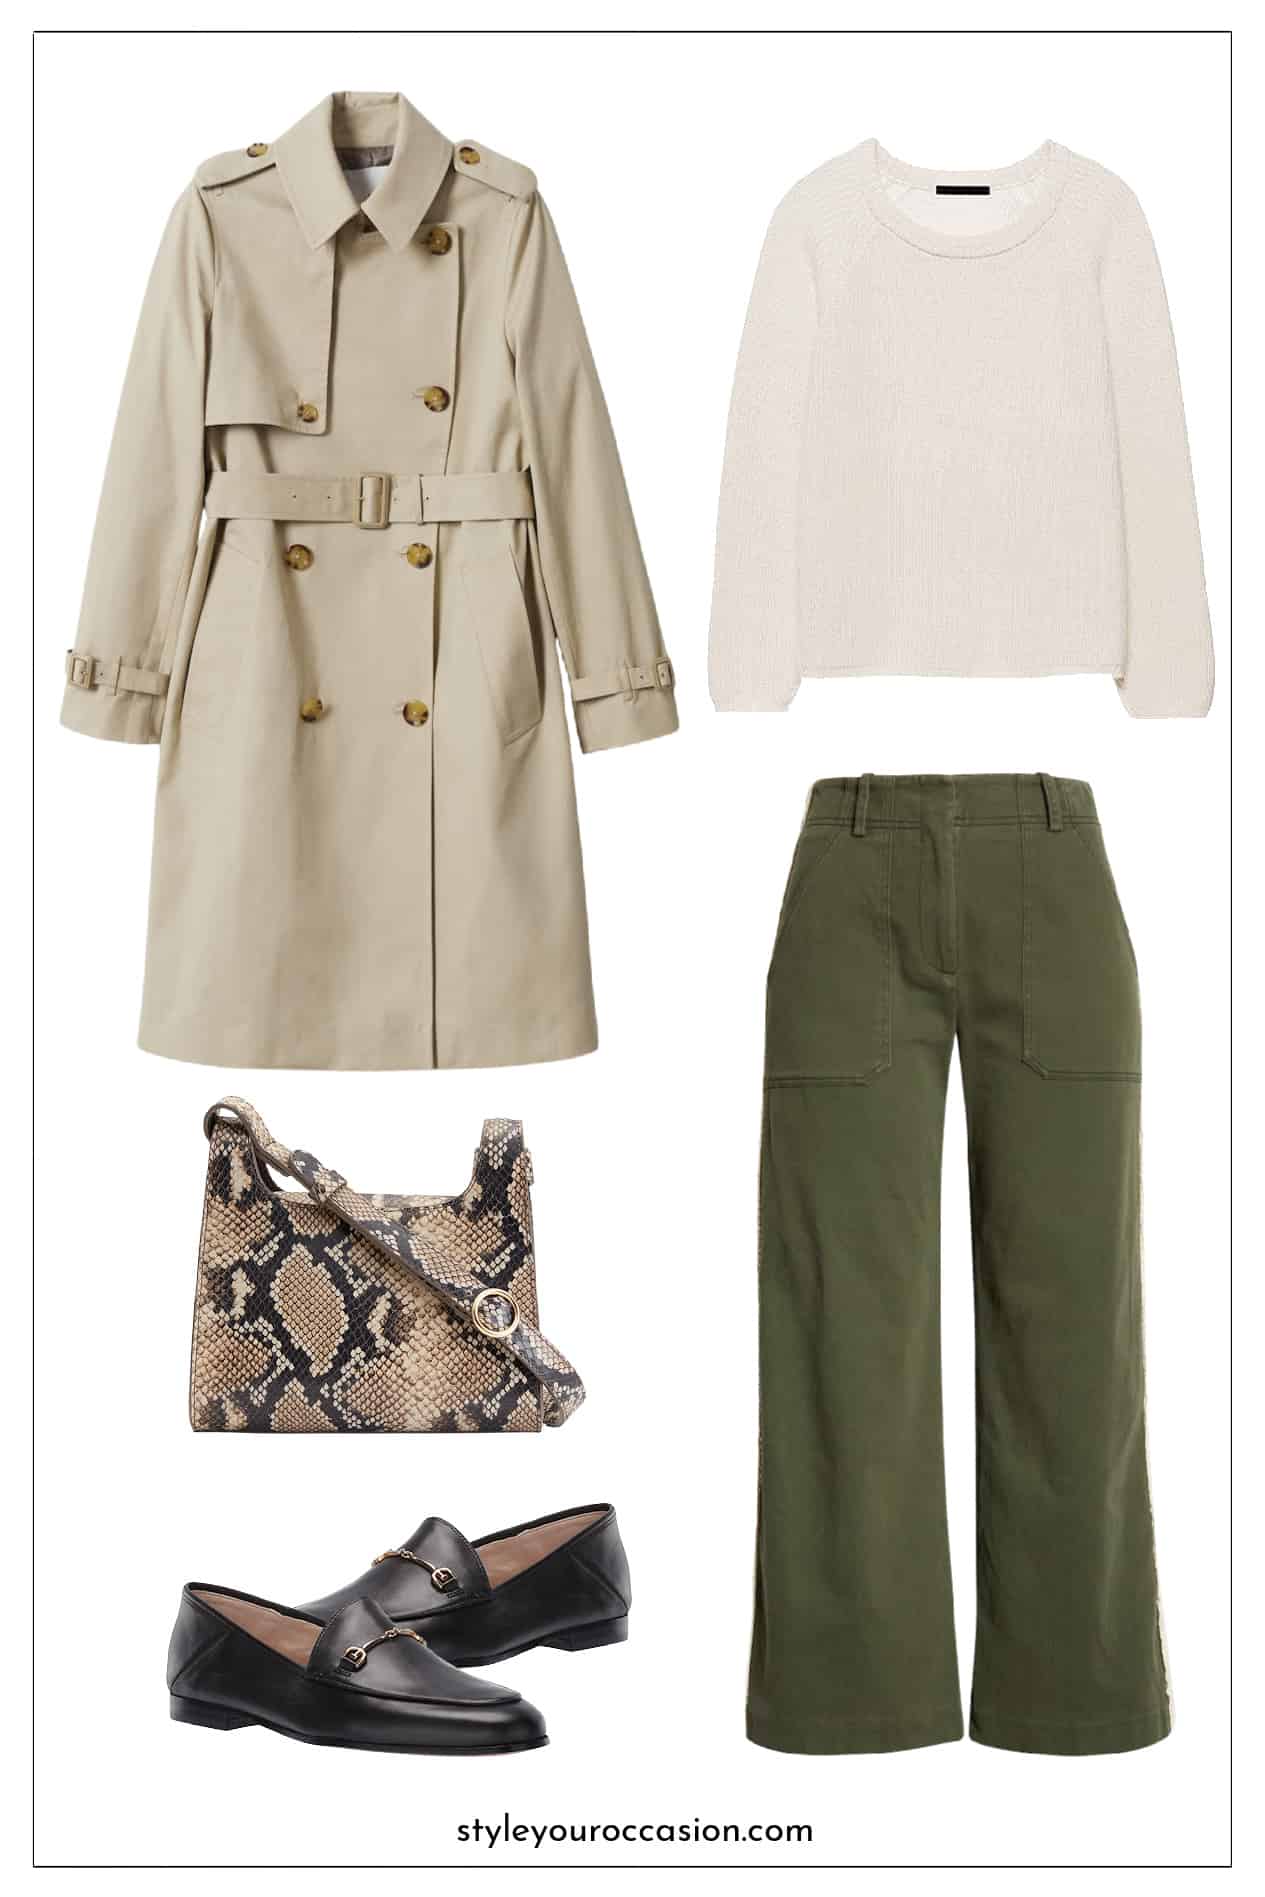 image of an outfit with green pants, a trench coat, ivory sweater, snake print bag, and black loafers